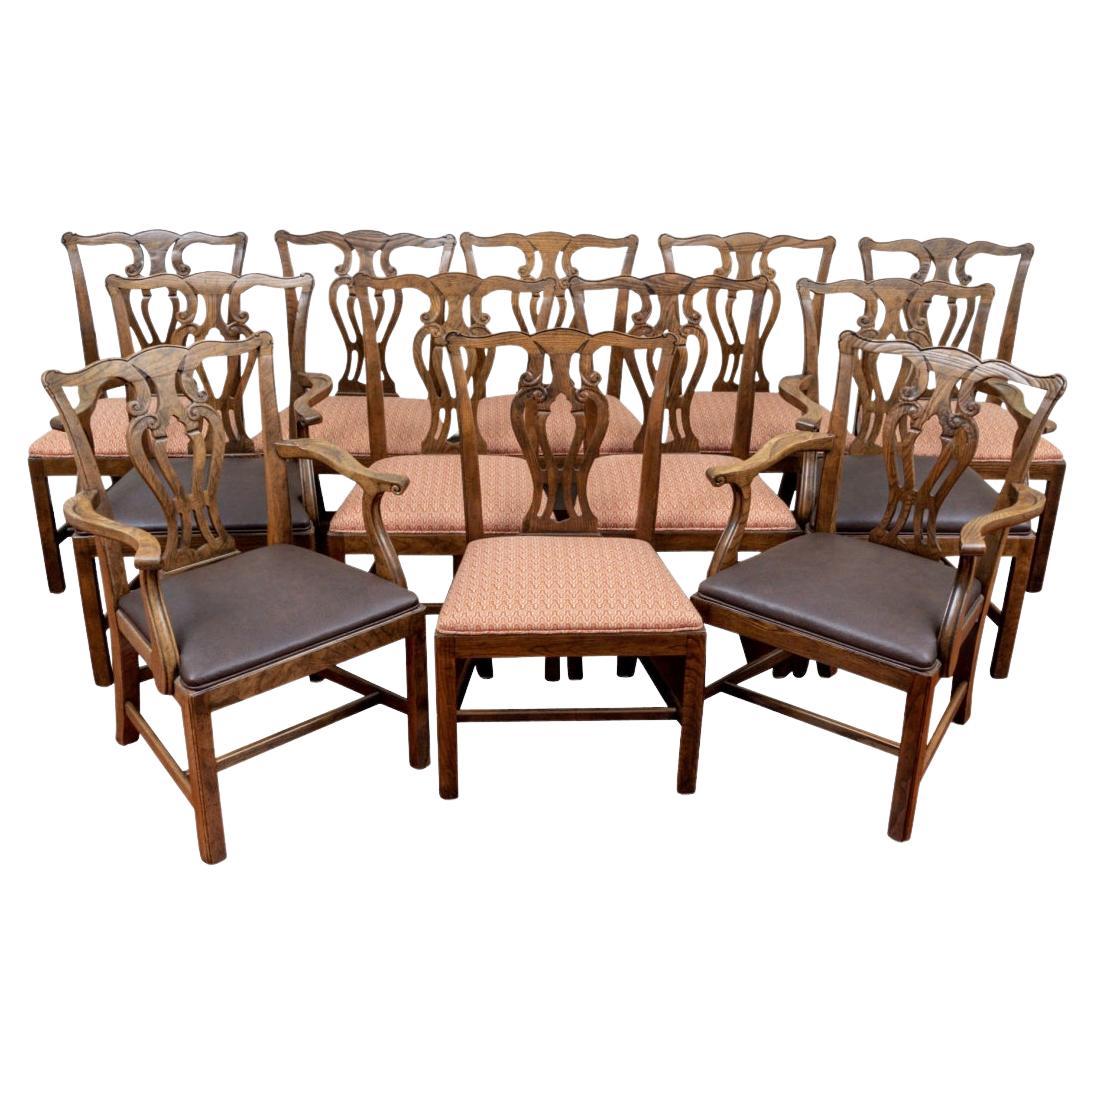 Set Of 12 Baker Furniture Dining Room Chairs - 4 Arm Chairs & 8 Side Chairs For Sale